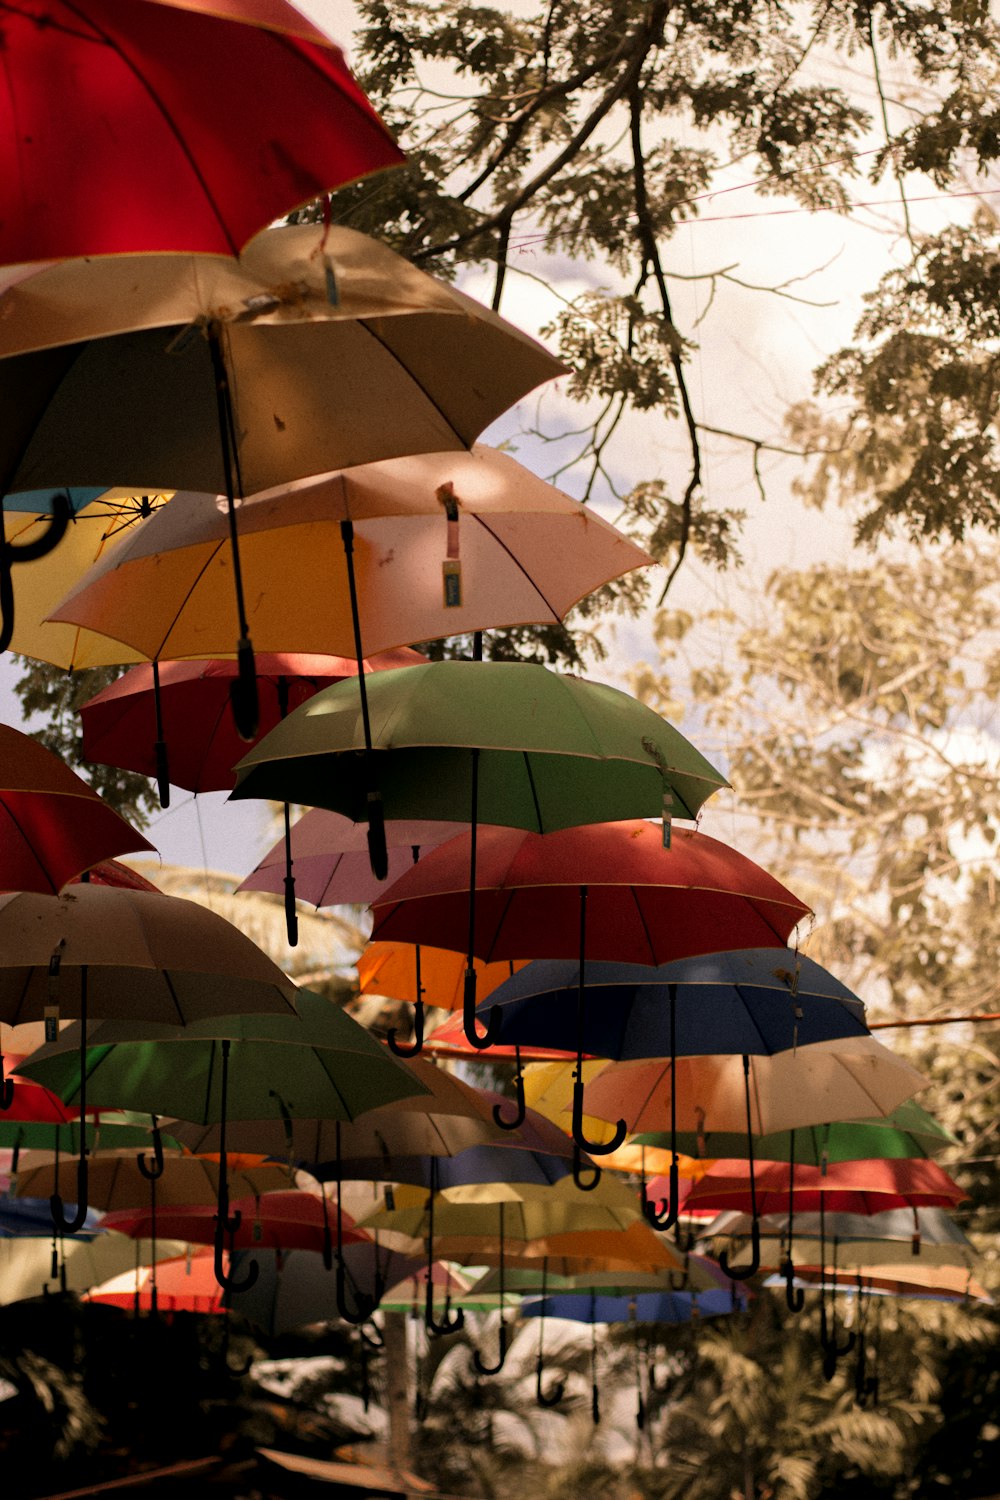 assorted umbrellas hanging on brown tree branch during daytime